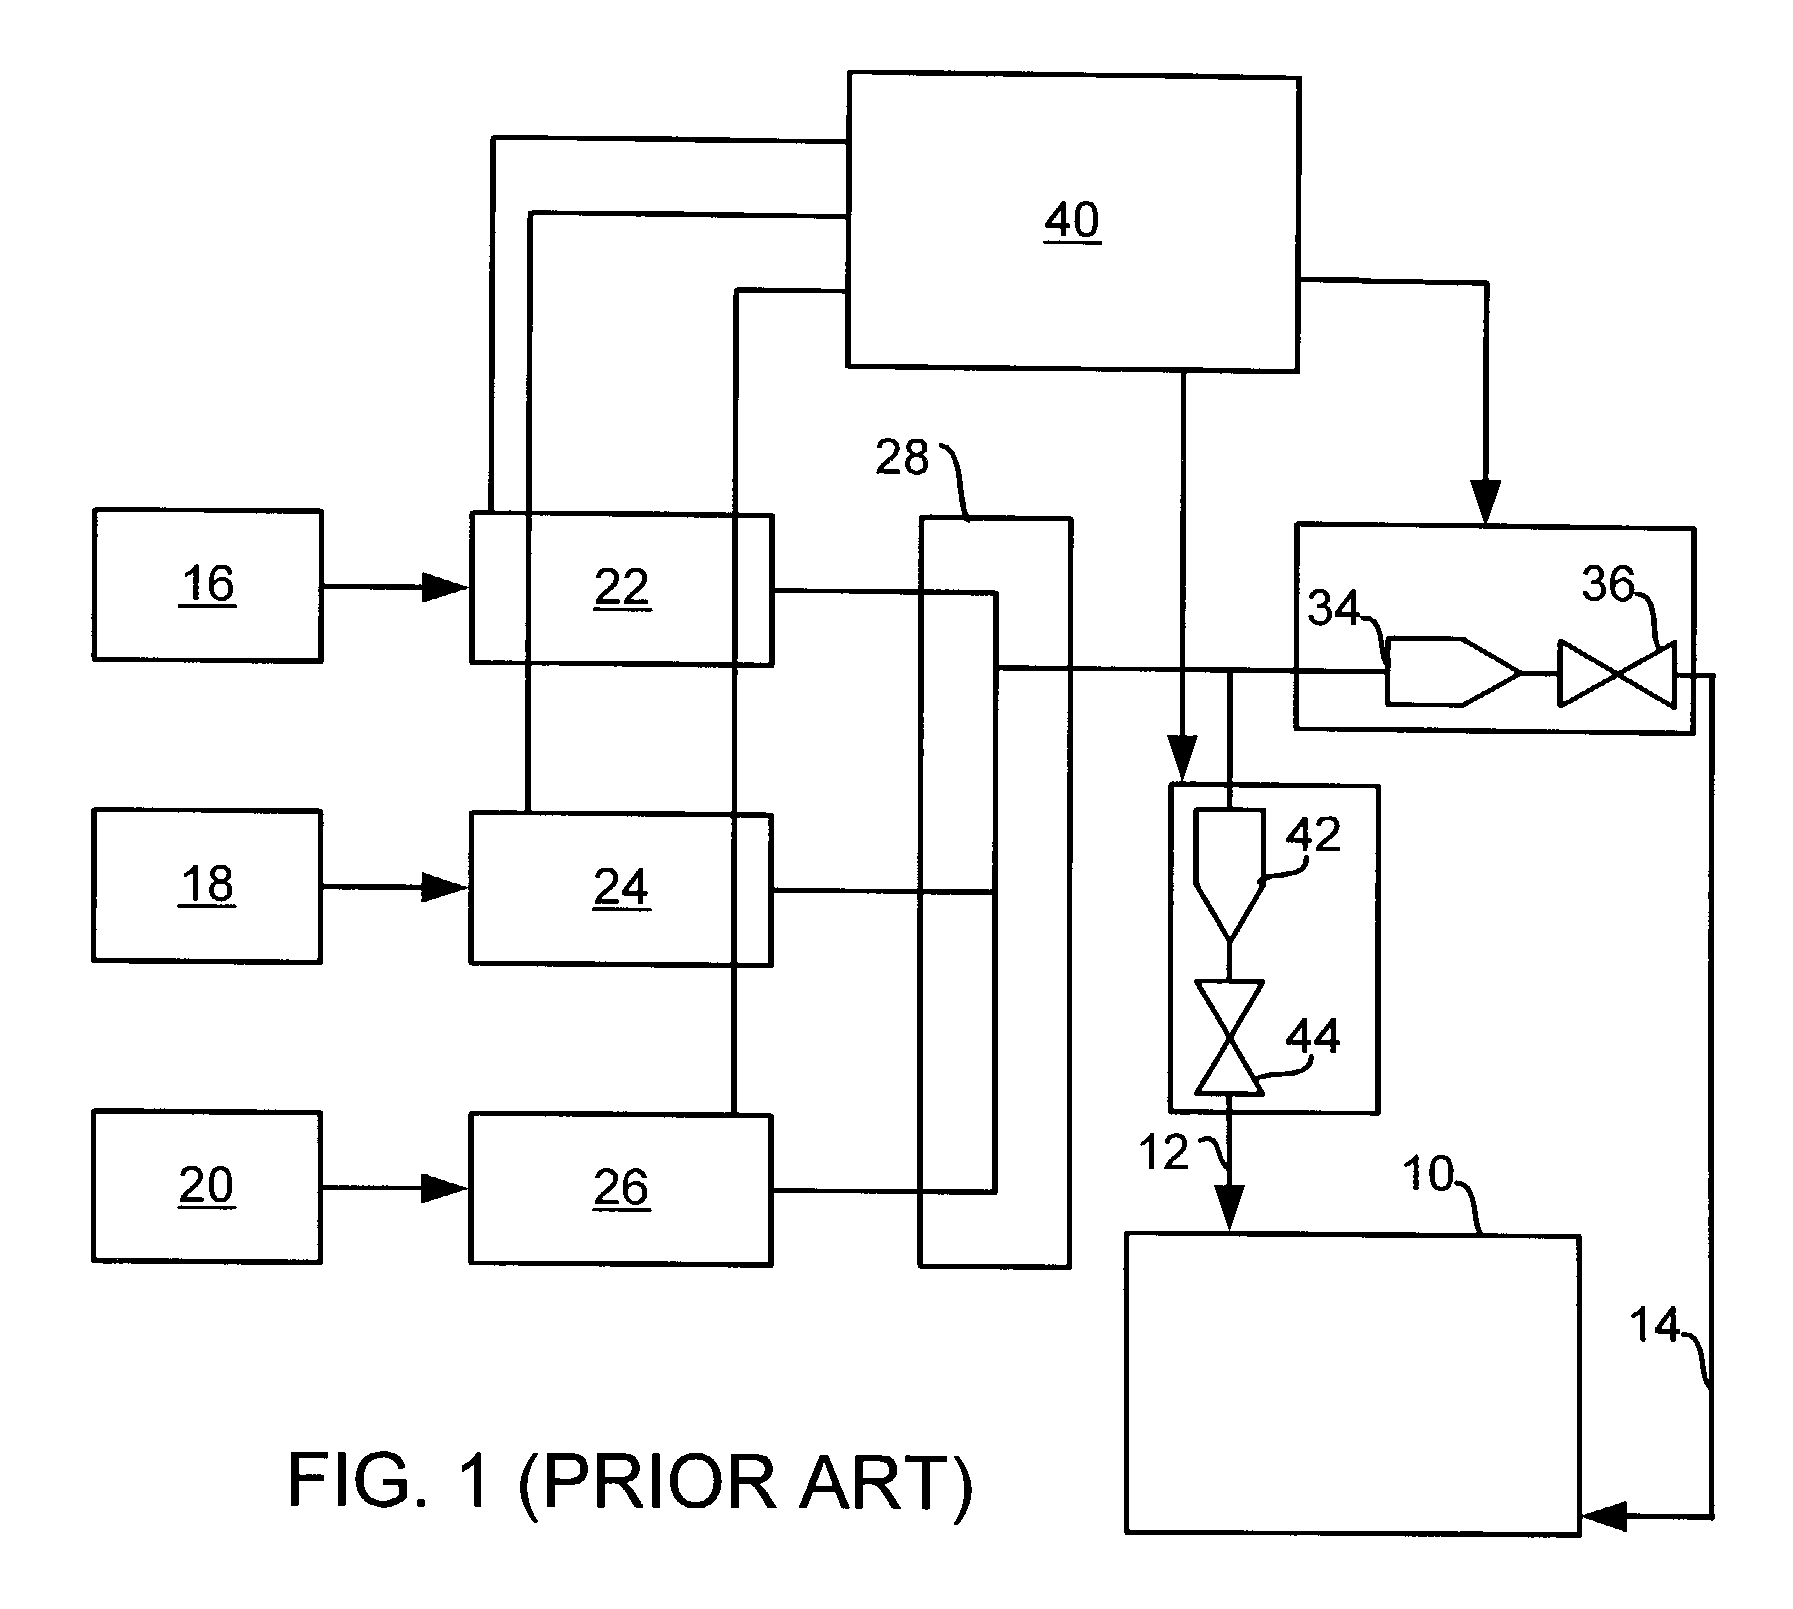 Gas distribution system with tuning gas